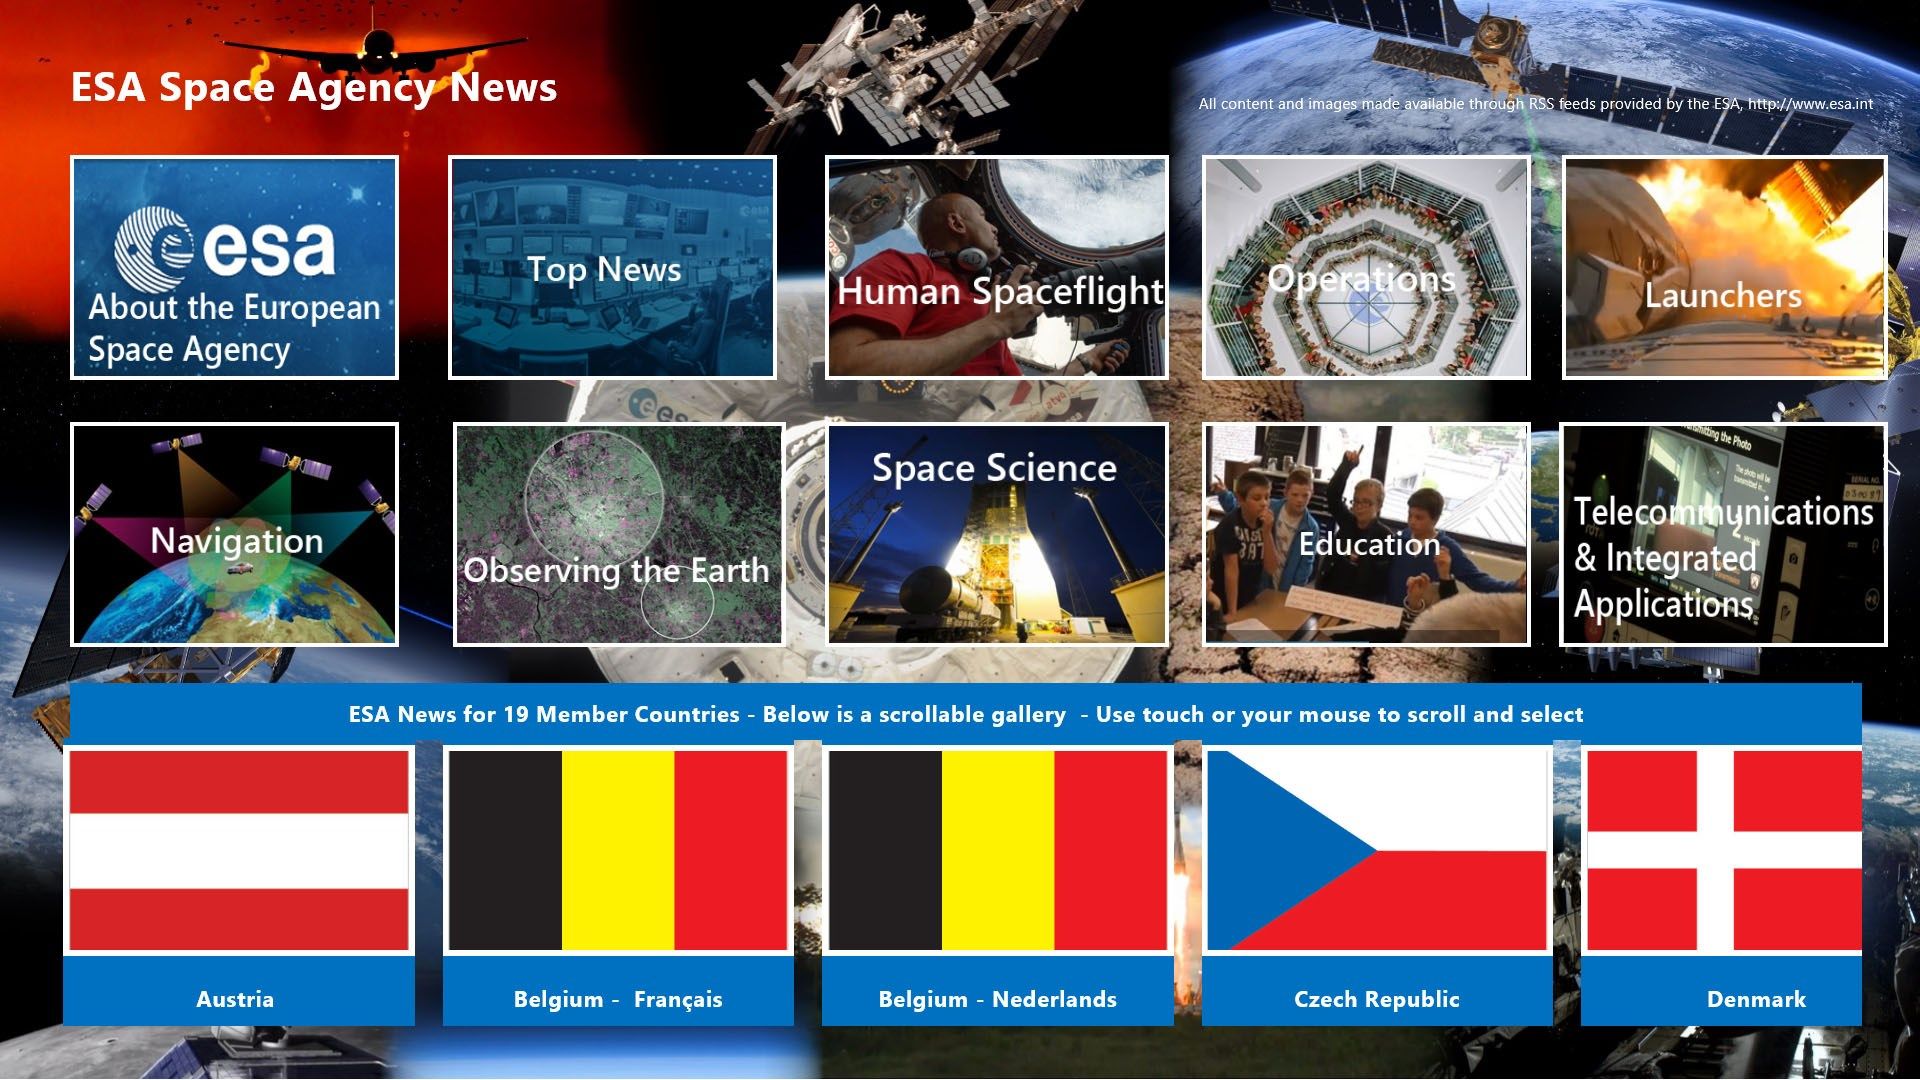 The home screen contains links to topical galleries as well as a scrollable gallery of member countries. Tap or click a tile or gallery flag to navigate to specific content.